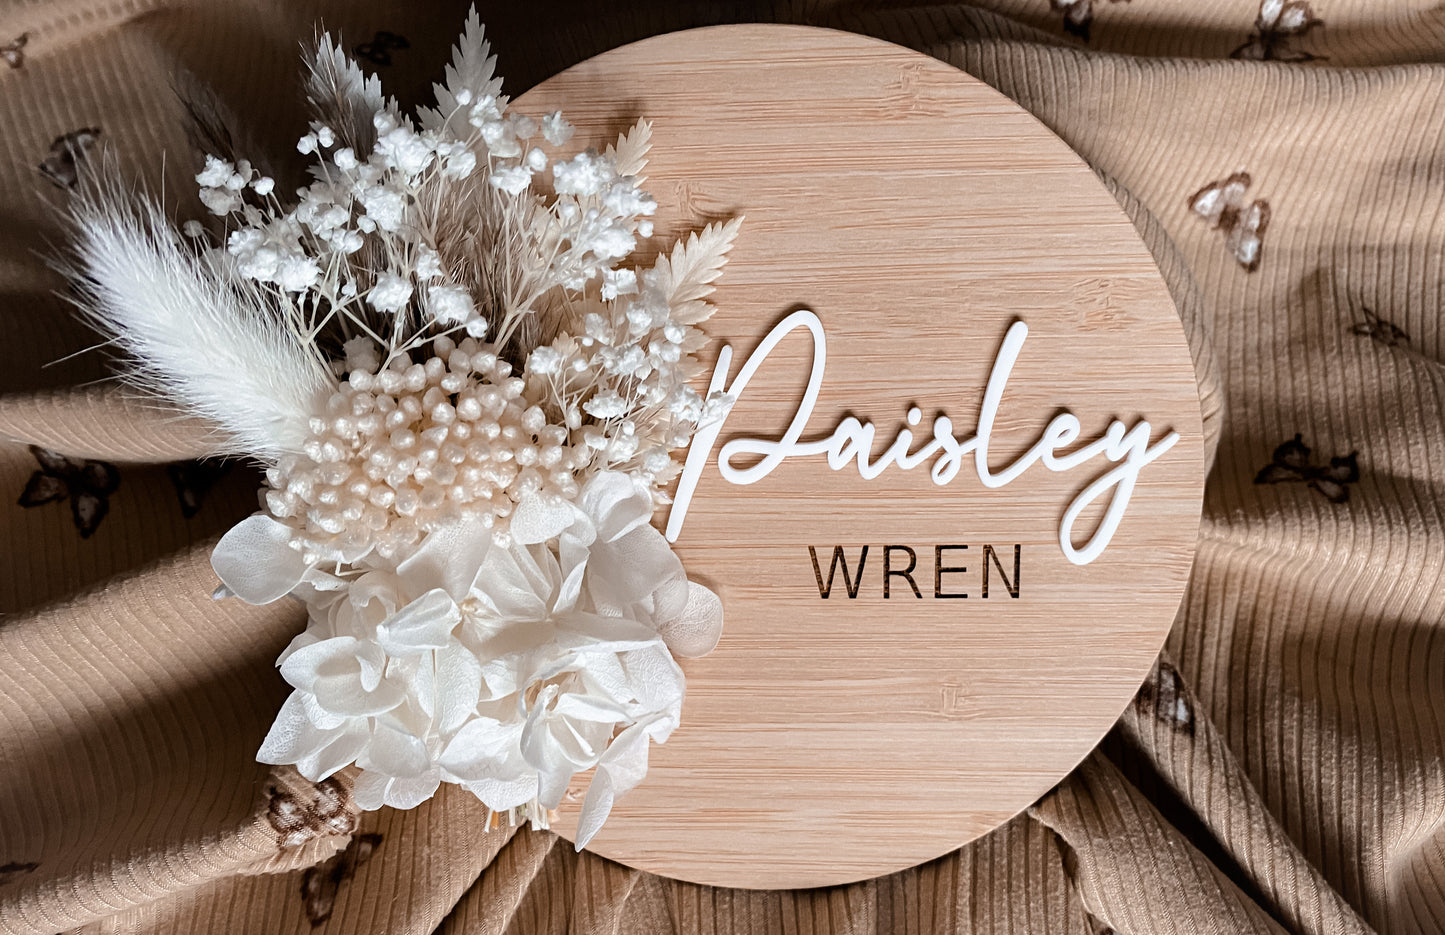 Dried flower wooden name sign with different fonts